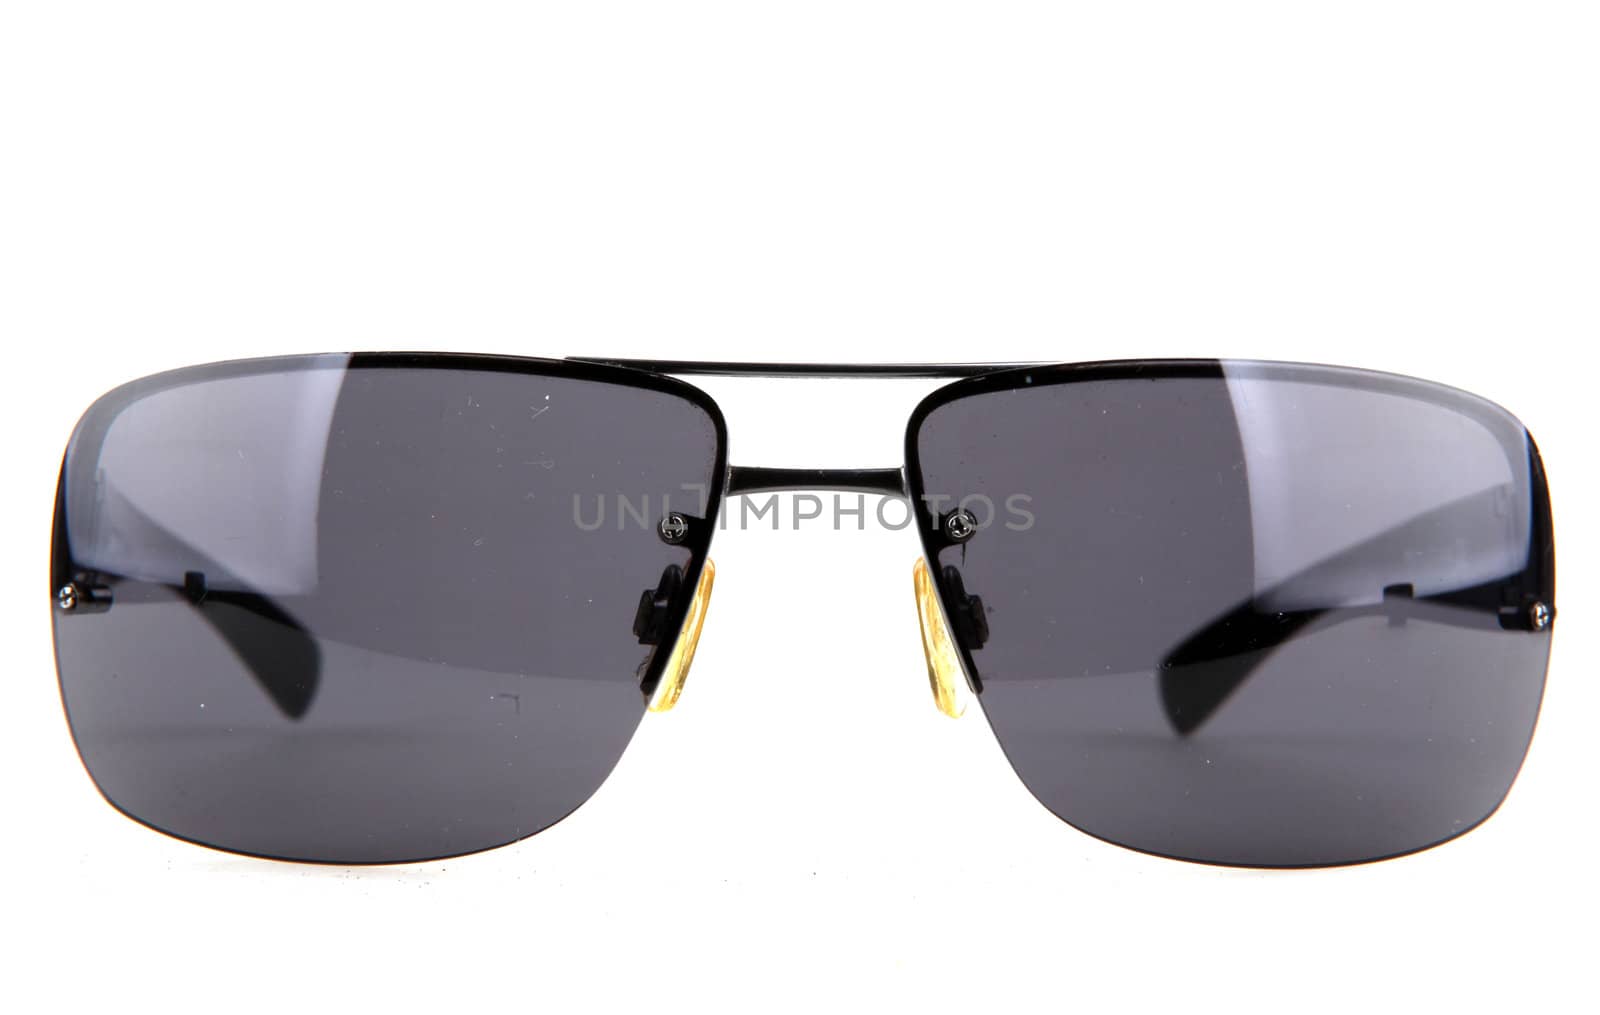 Sunglasses isolated on the white background.